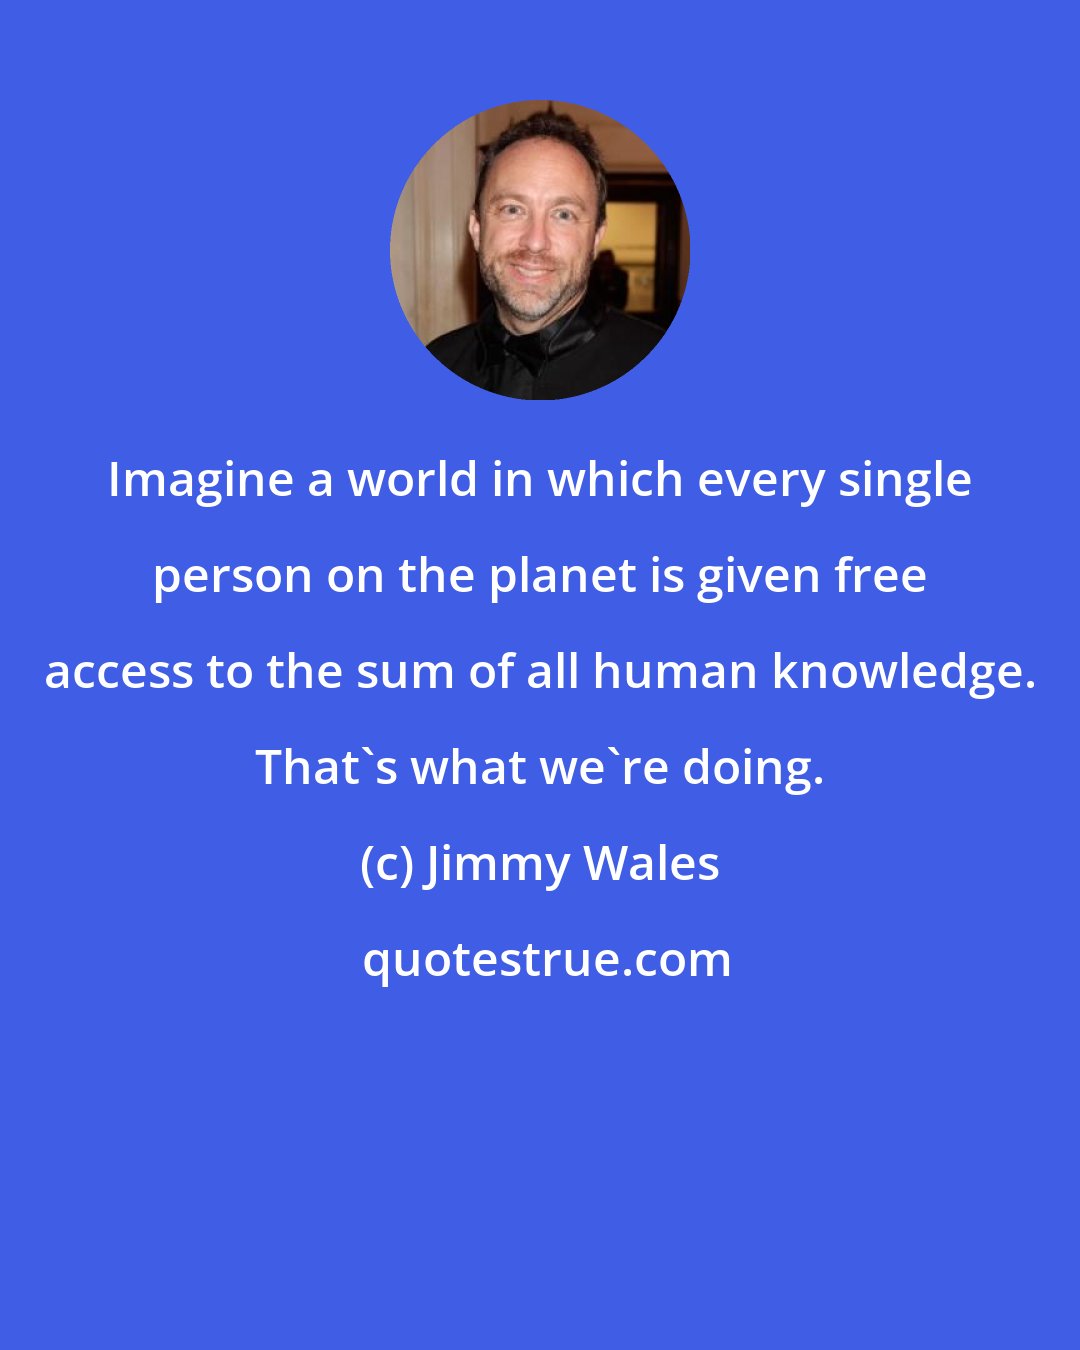 Jimmy Wales: Imagine a world in which every single person on the planet is given free access to the sum of all human knowledge. That's what we're doing.